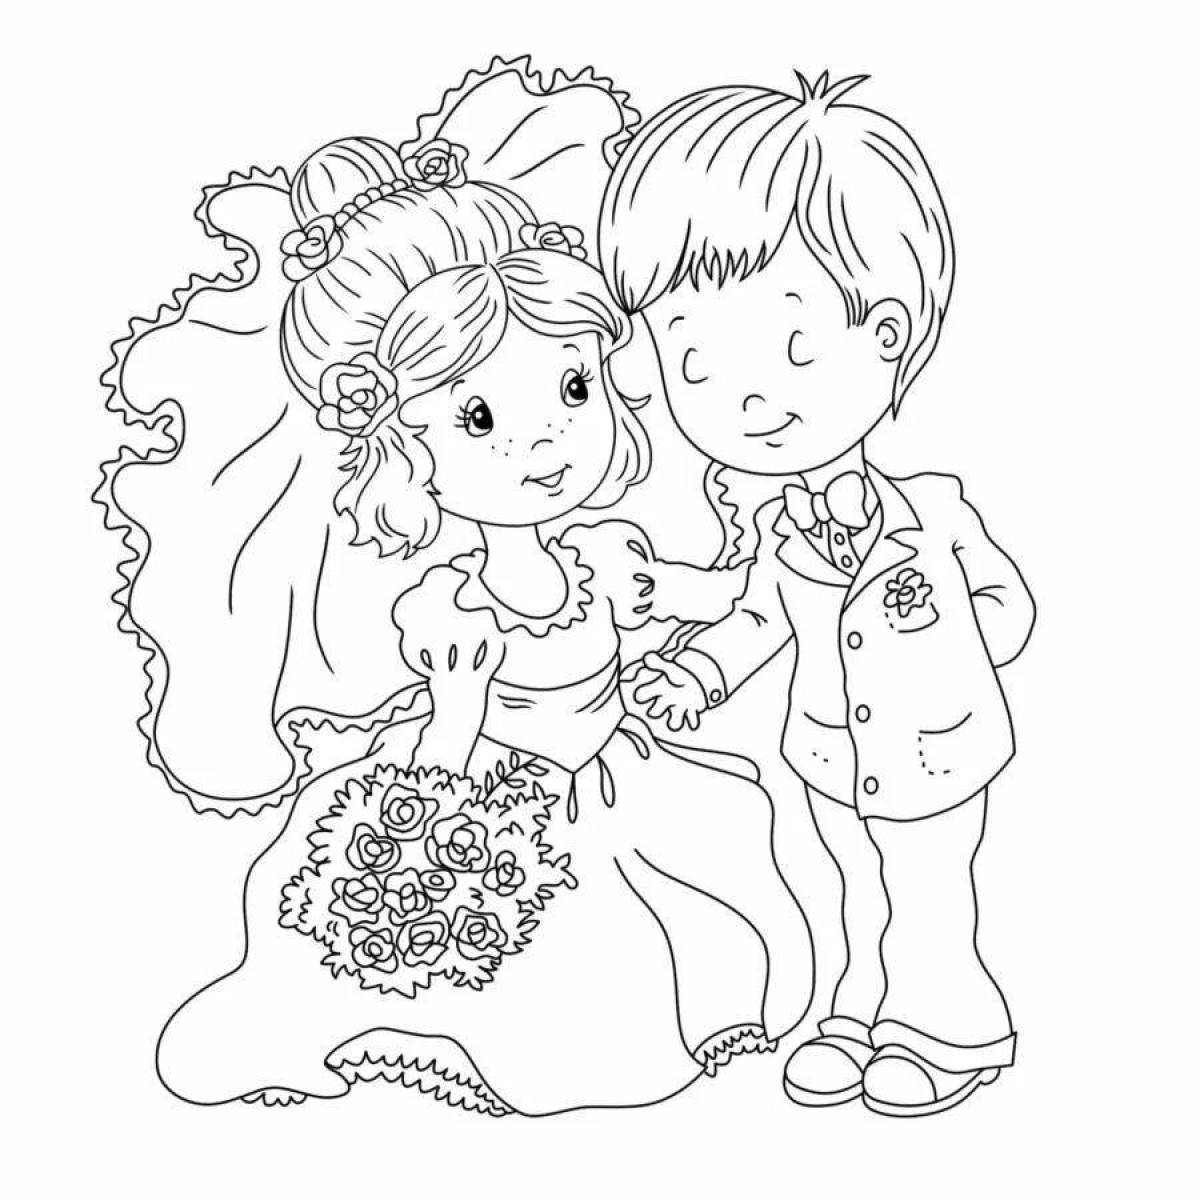 Bright bride and groom coloring page